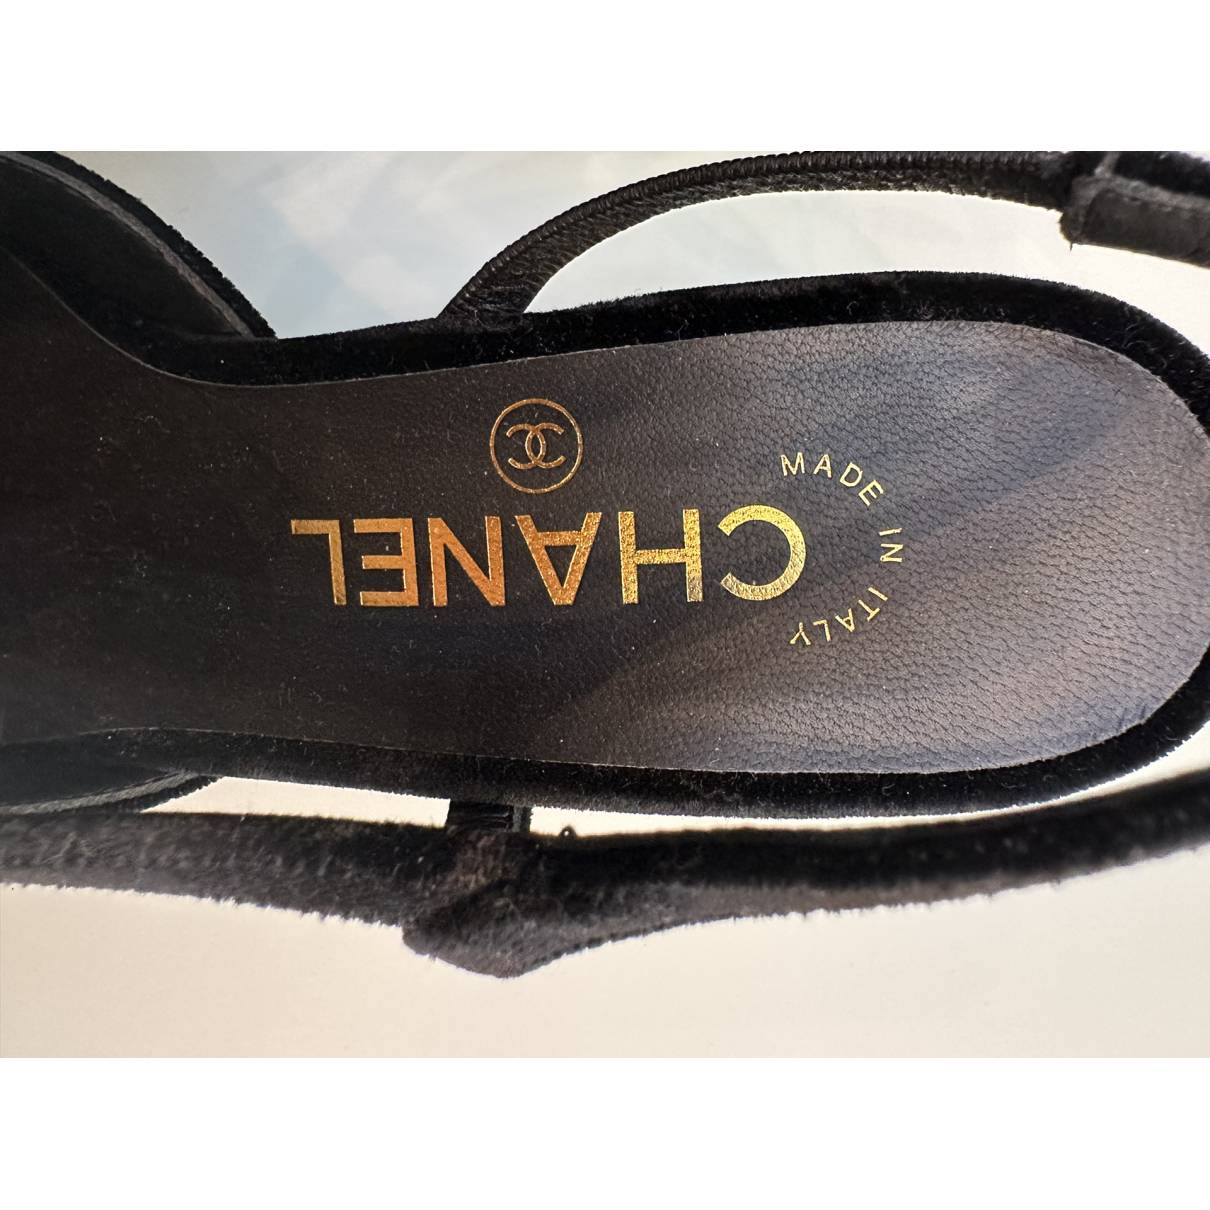 Chanel - Authenticated Mules - Velvet Black Plain for Women, Very Good Condition